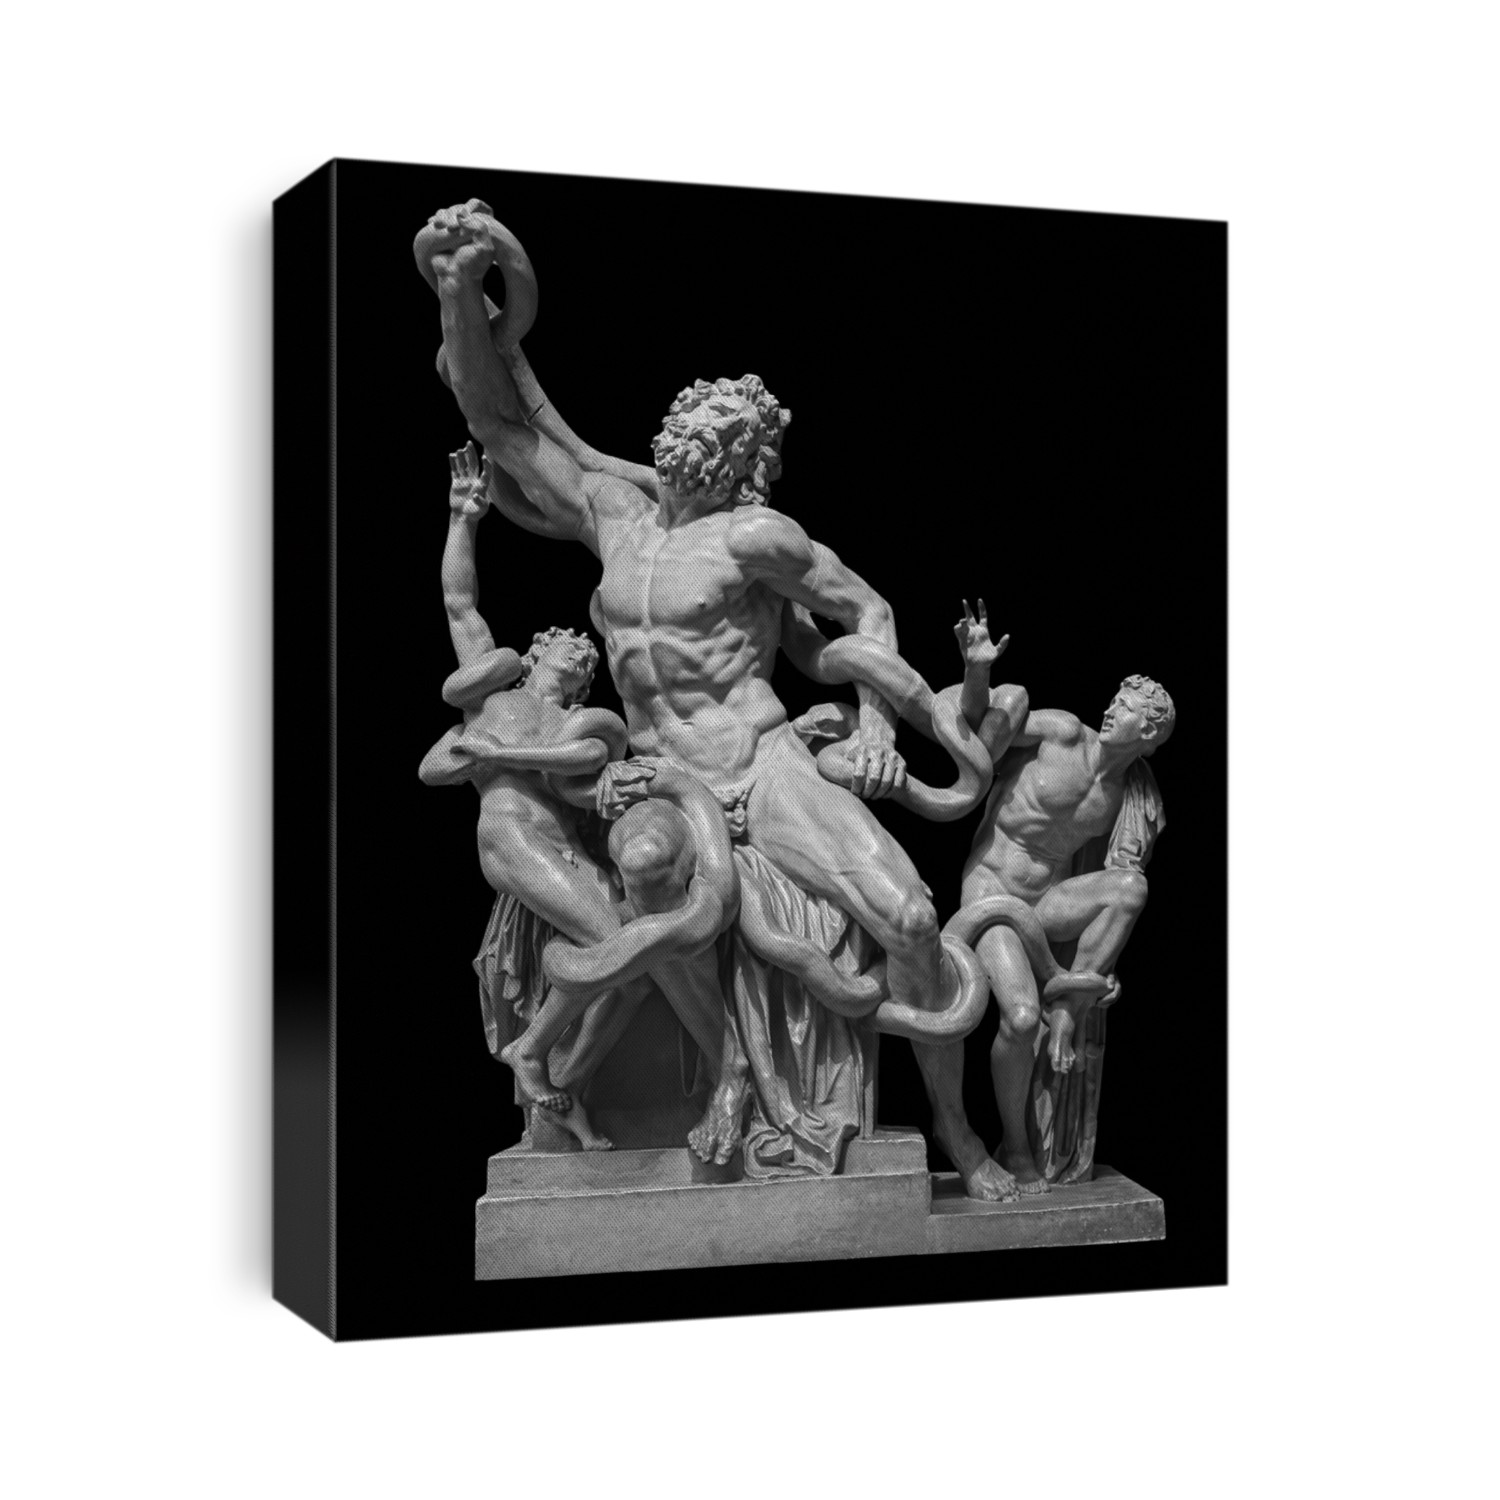 Front view of famous laocoon roman copy sculpture isolated on black background. Trojan Laocoon was strangled by sea snakes with his two sons